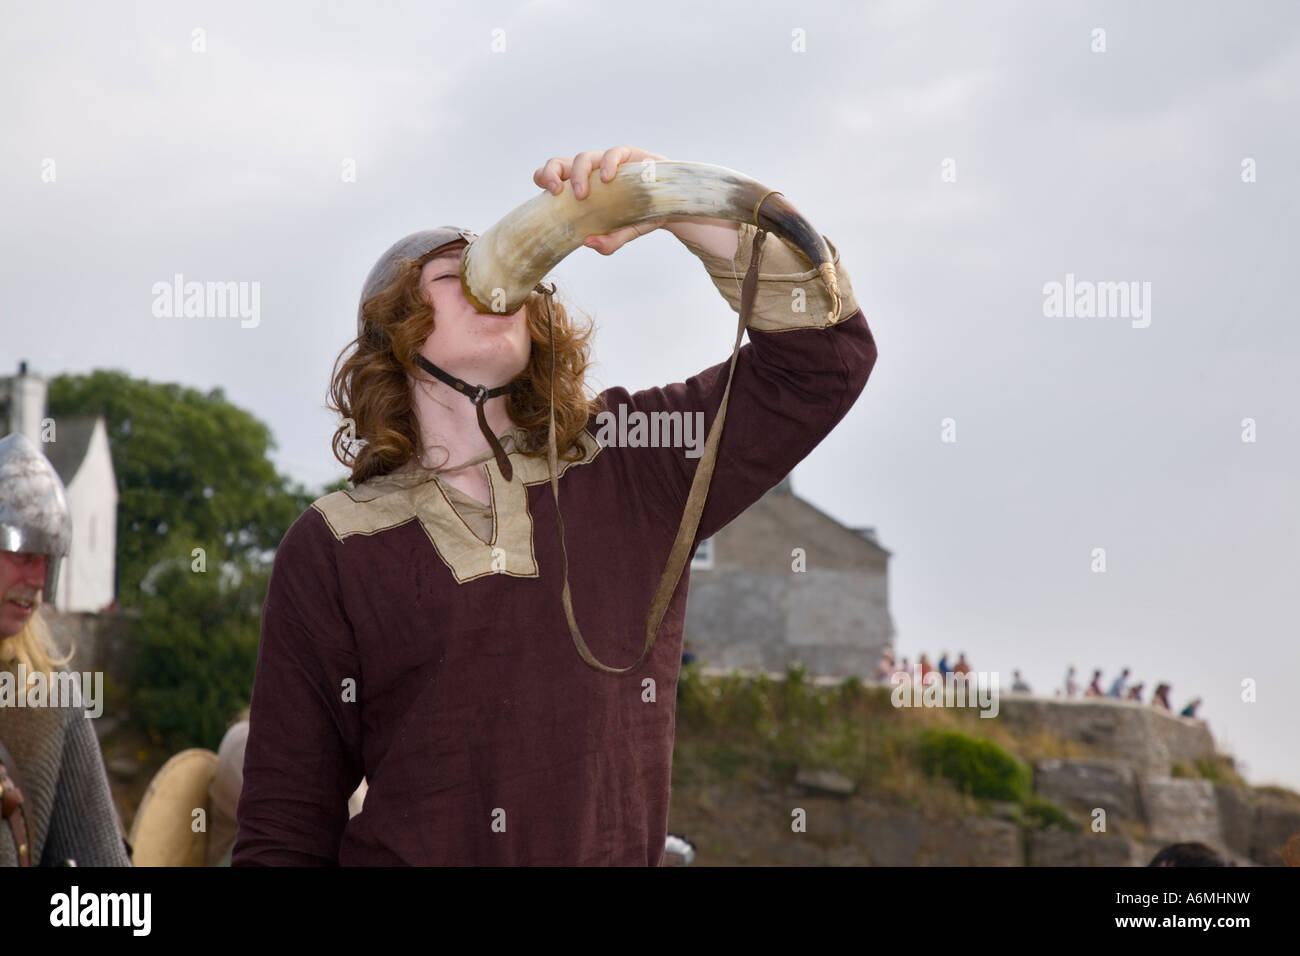 AMLWCH BIENNIAL VIKING FESTIVAL actor with helmet uniform drinking from horn after re-enactment of battle Anglesey Wales UK Stock Photo